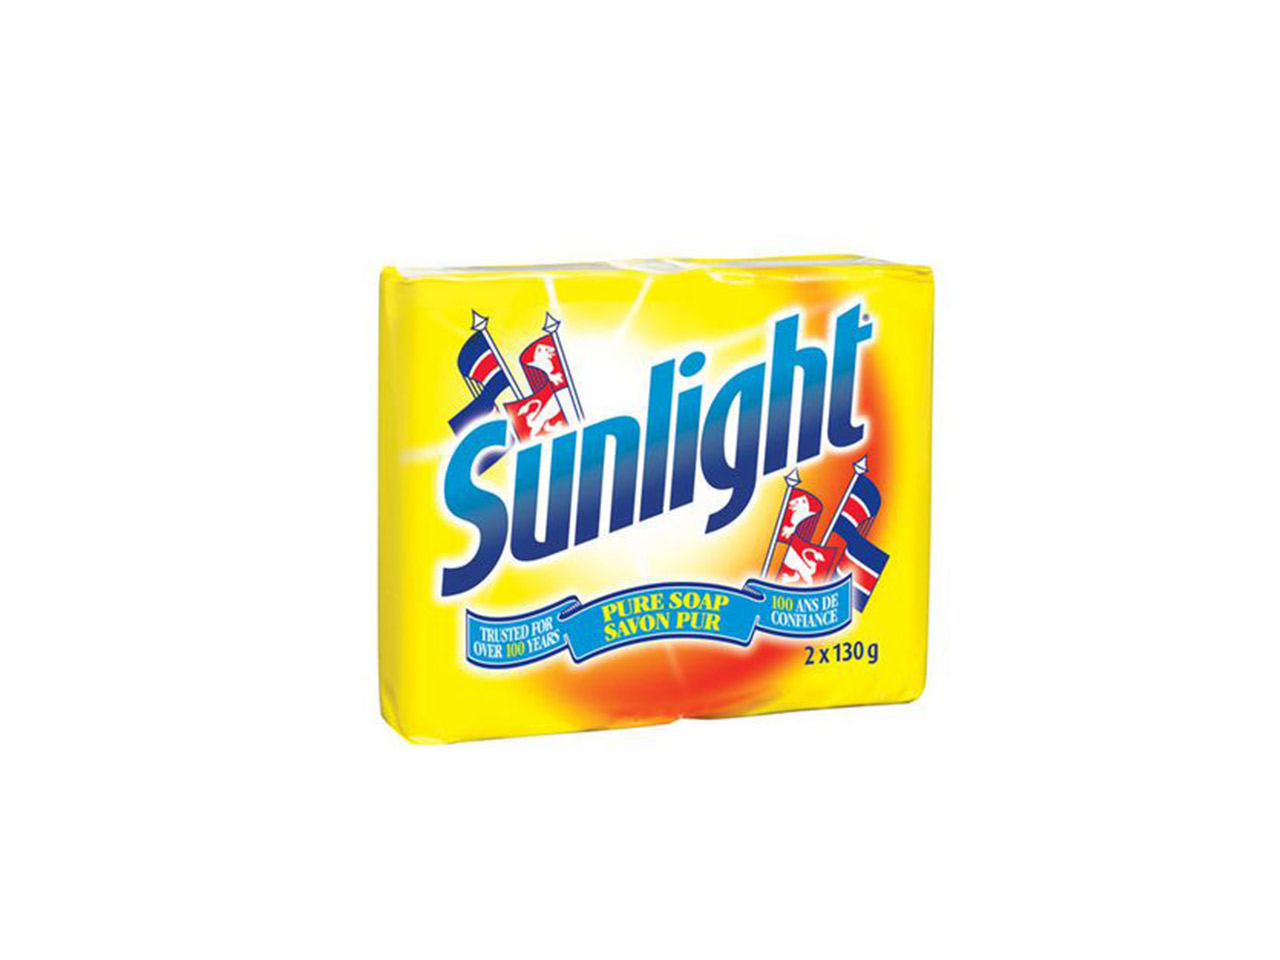 A packaged yellow bar of sunlight soap